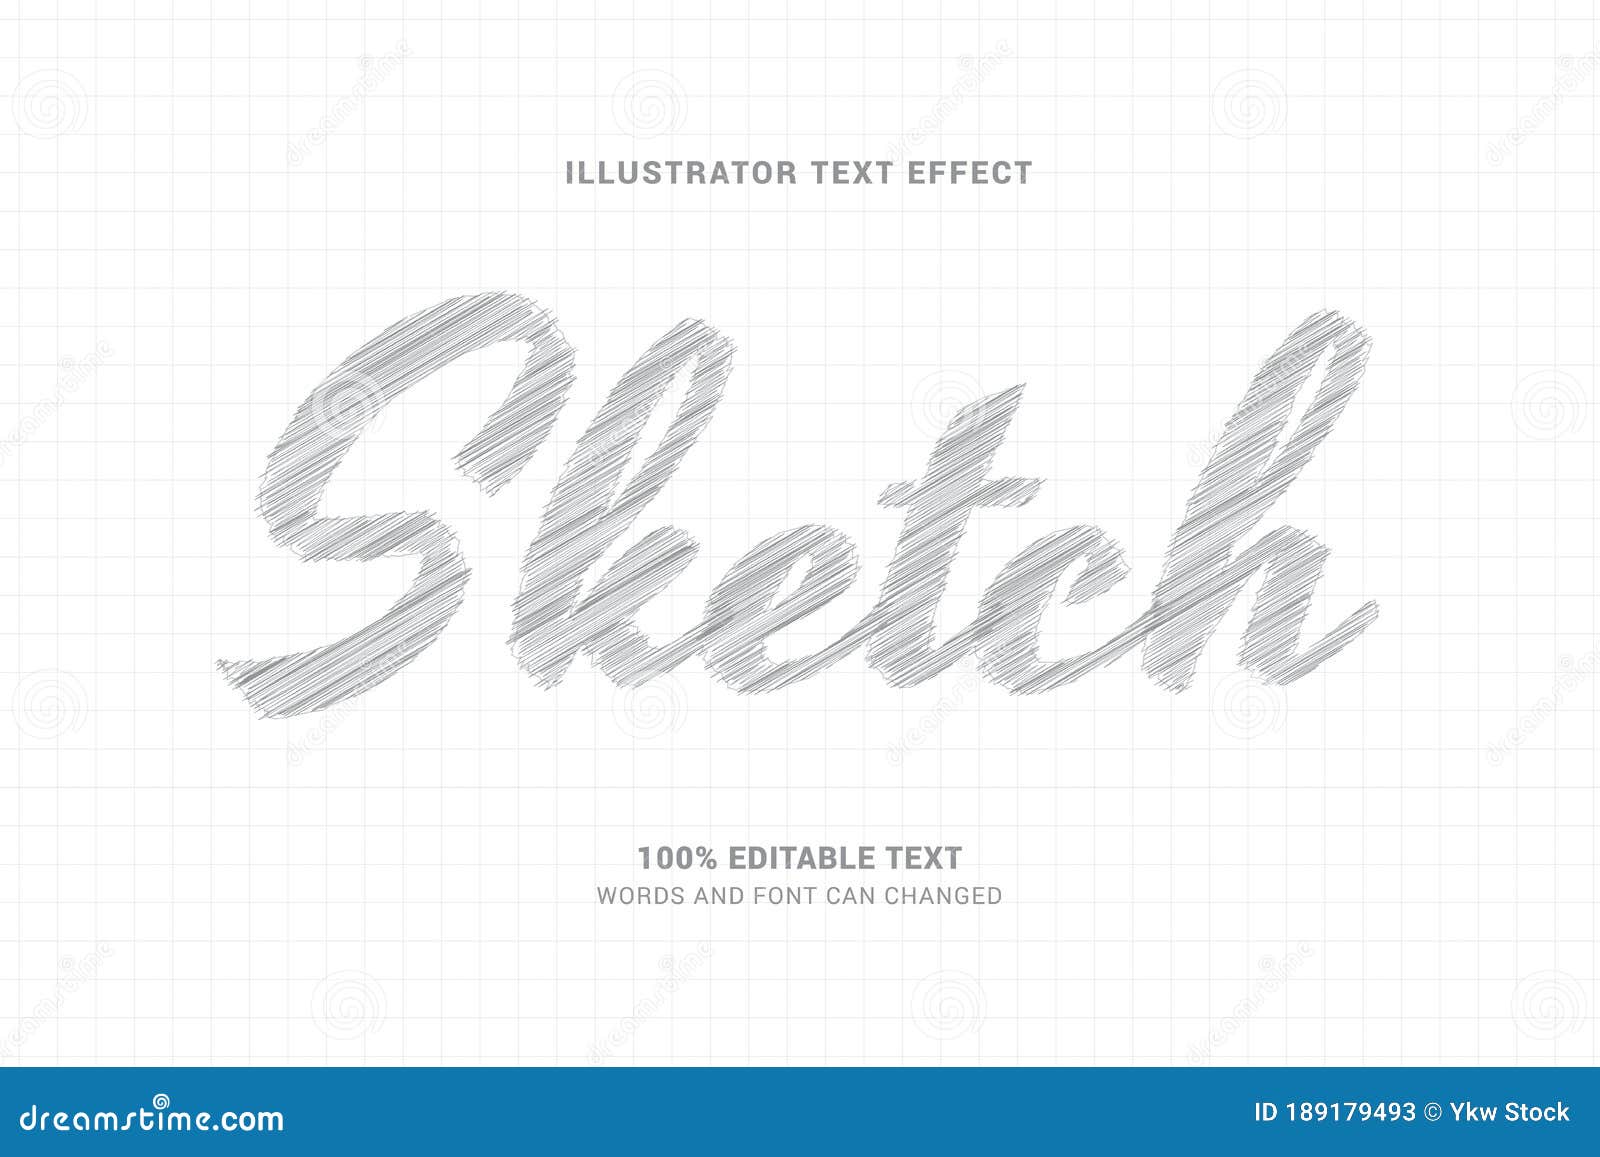 Pencil Sketch draw the word hello, brush script font style 